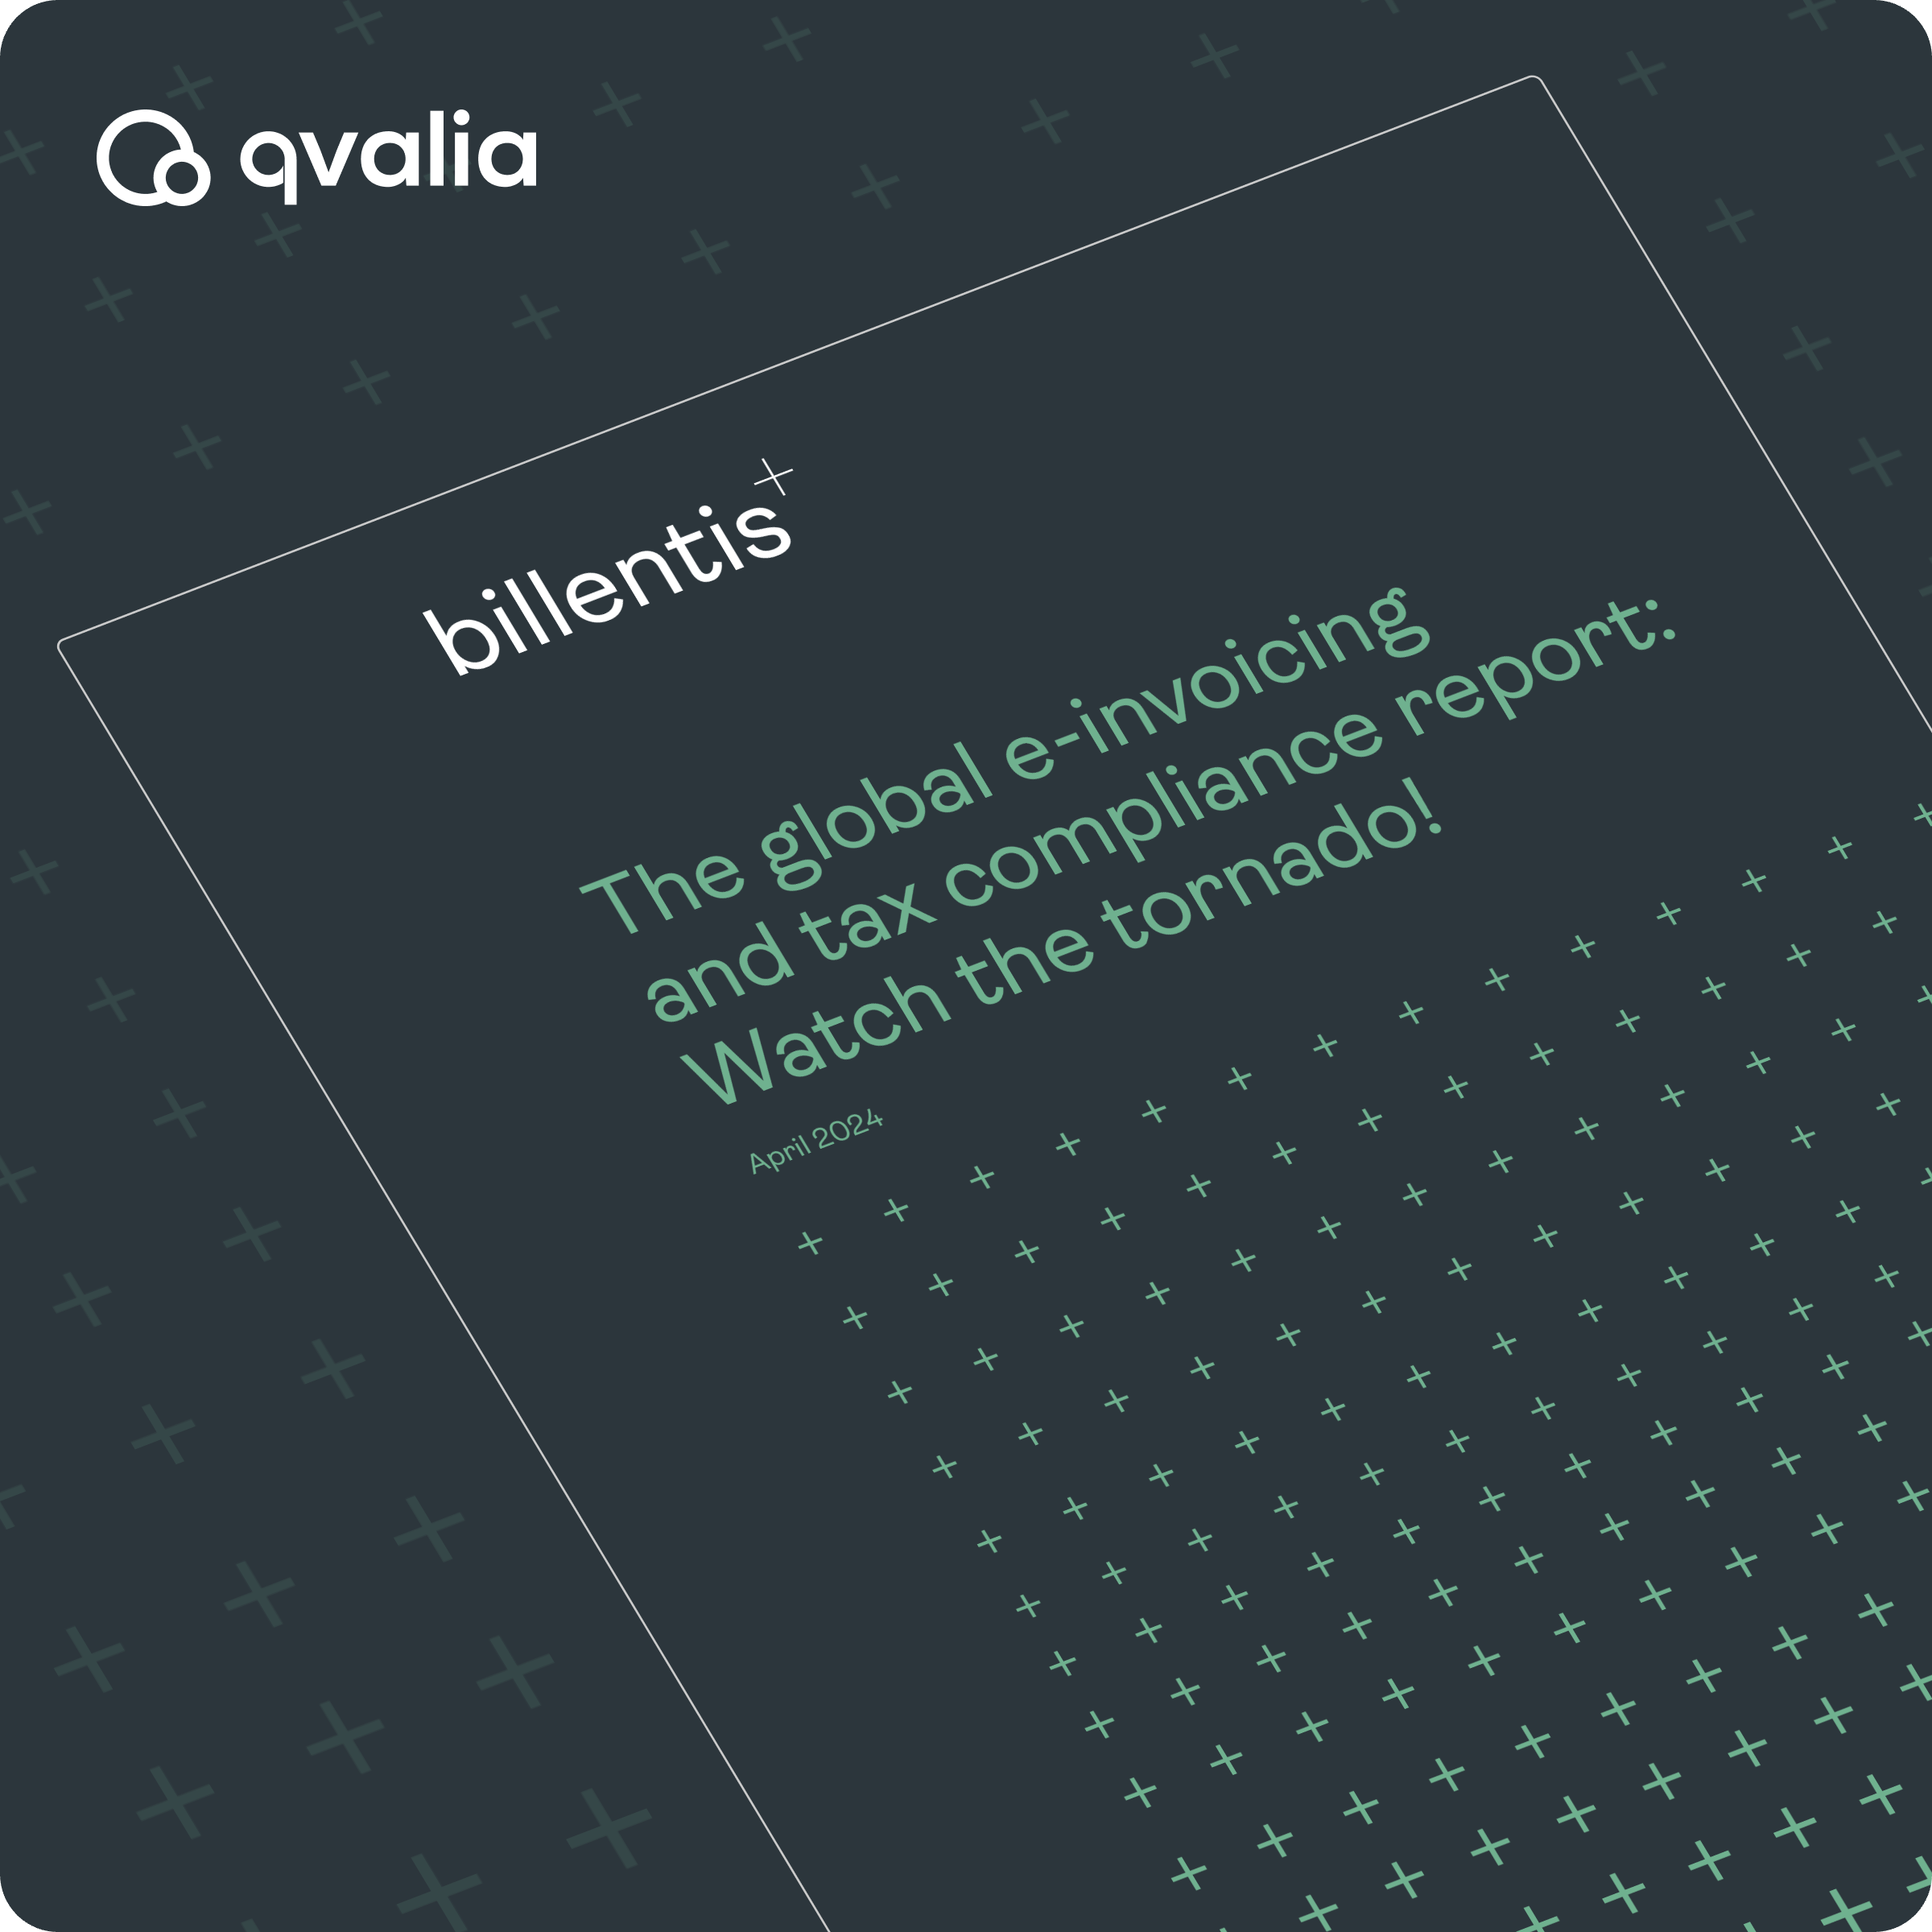 The global e-invoicing and tax compliance report Watch the tornado